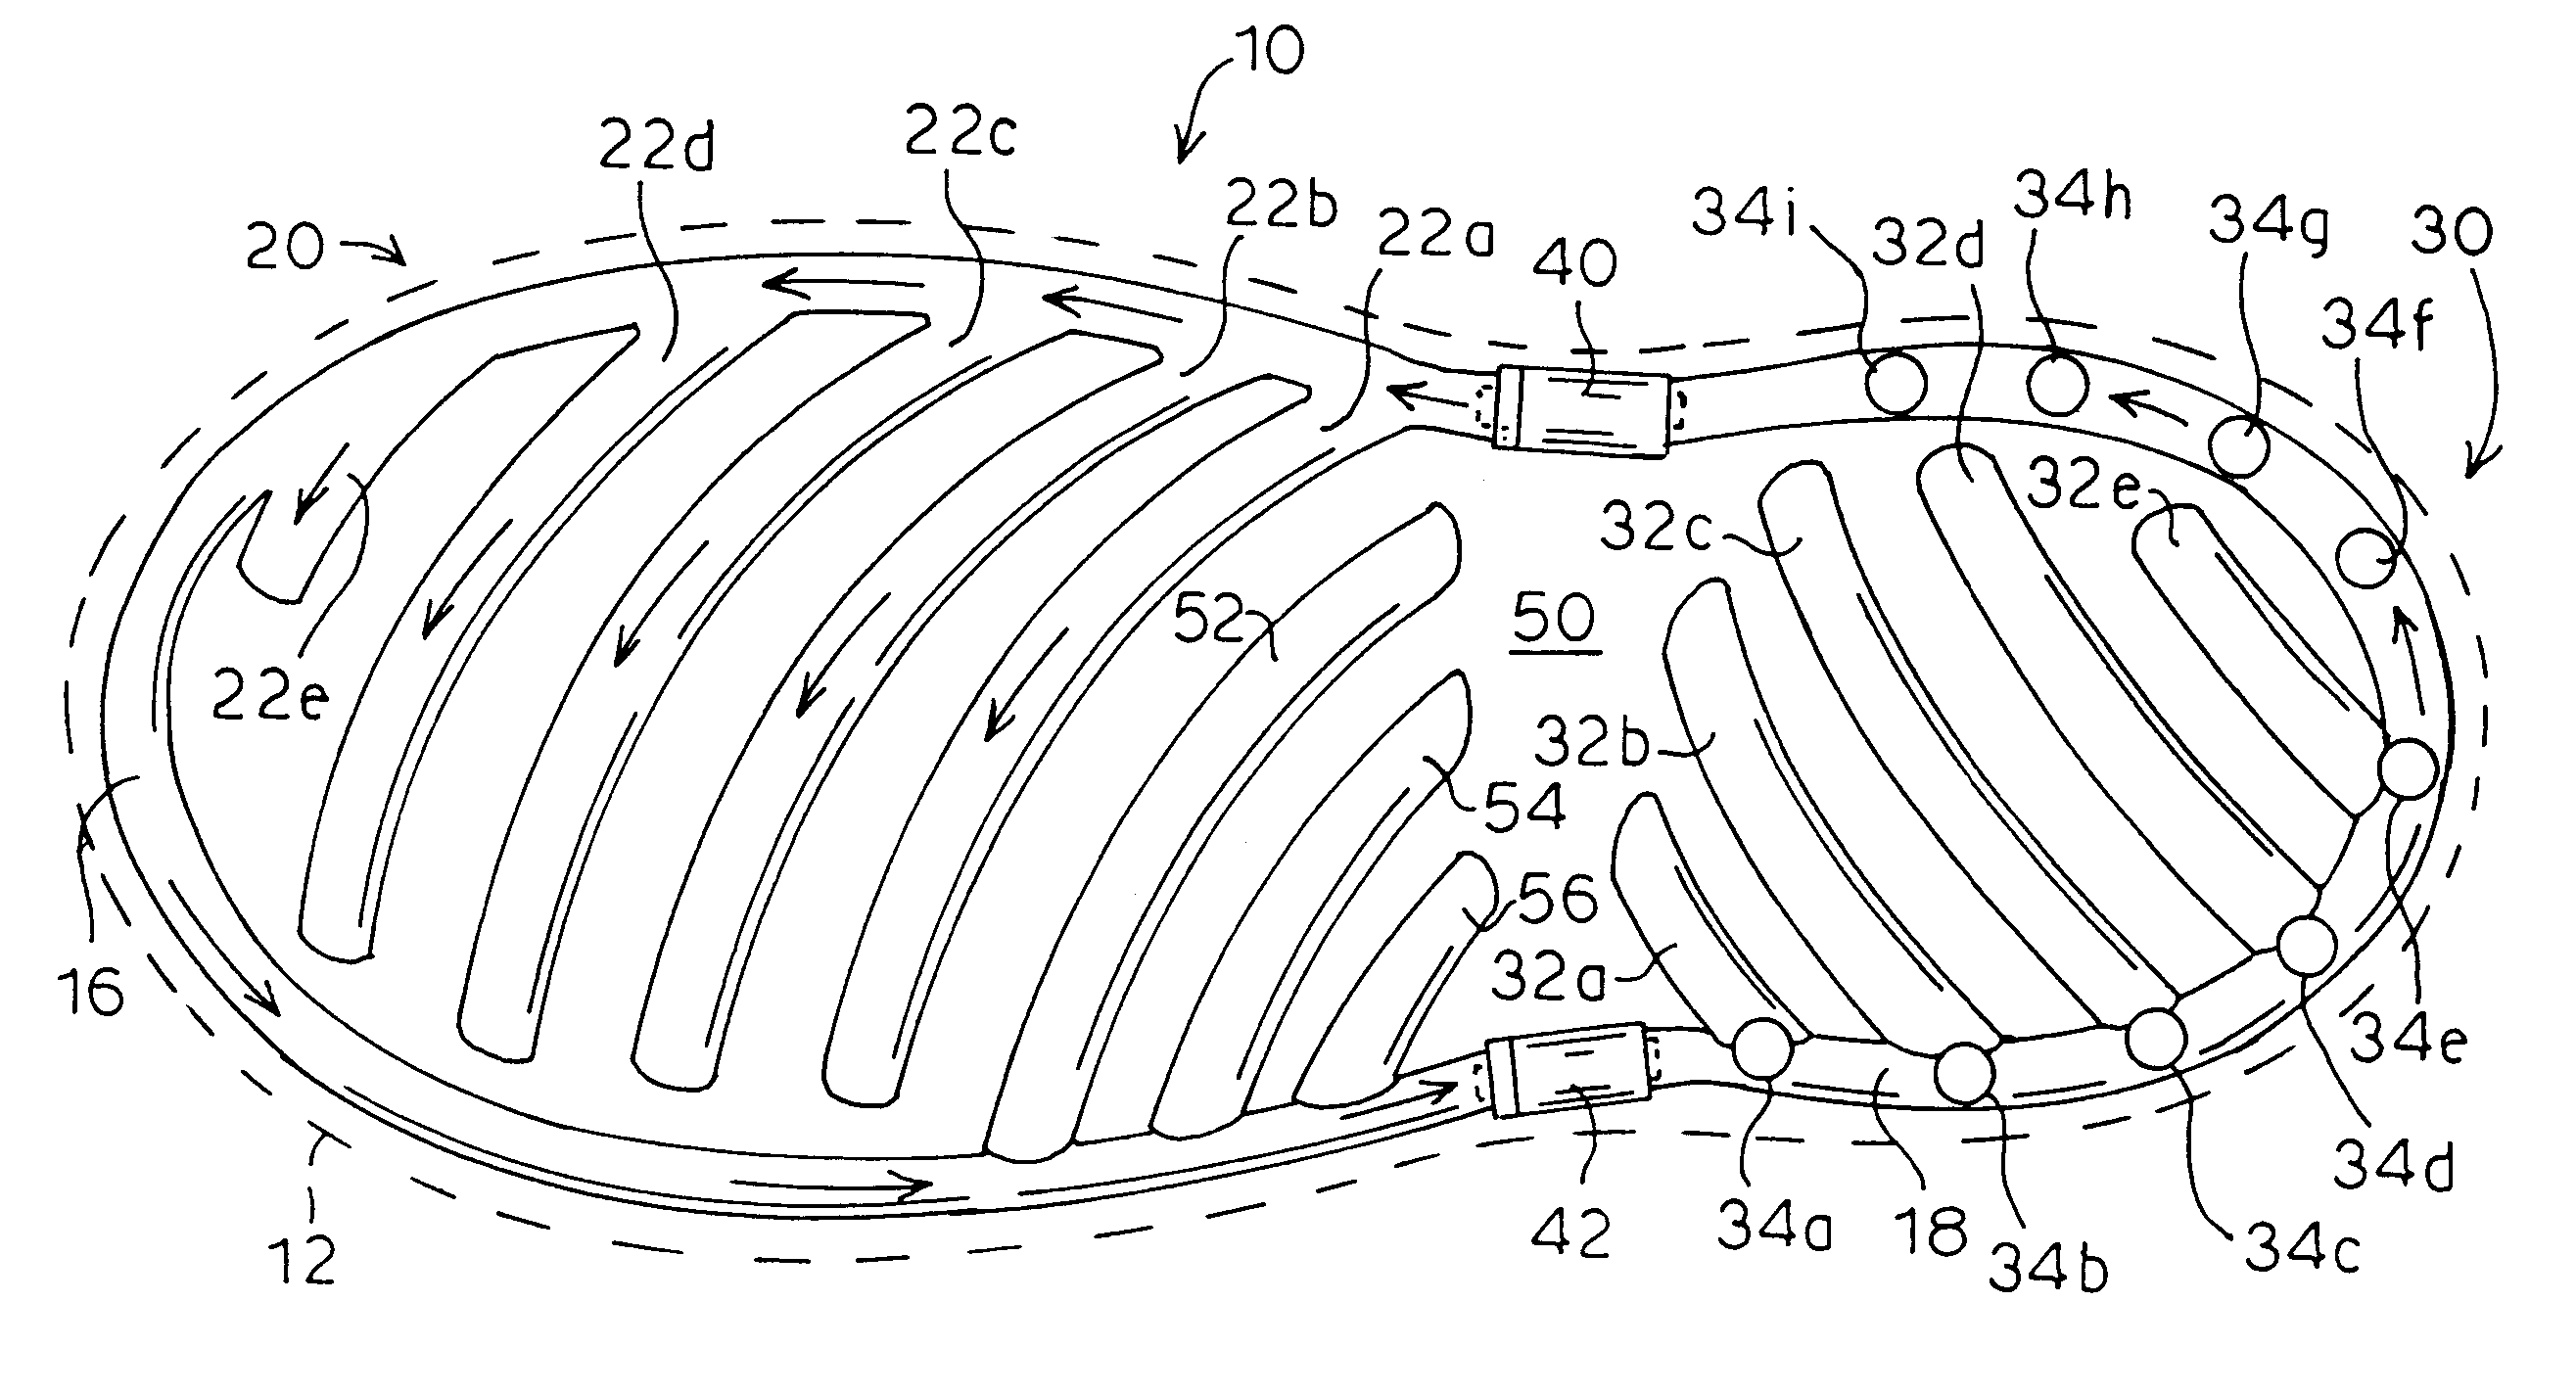 Method and apparatus for fluid flow transfer in shoes